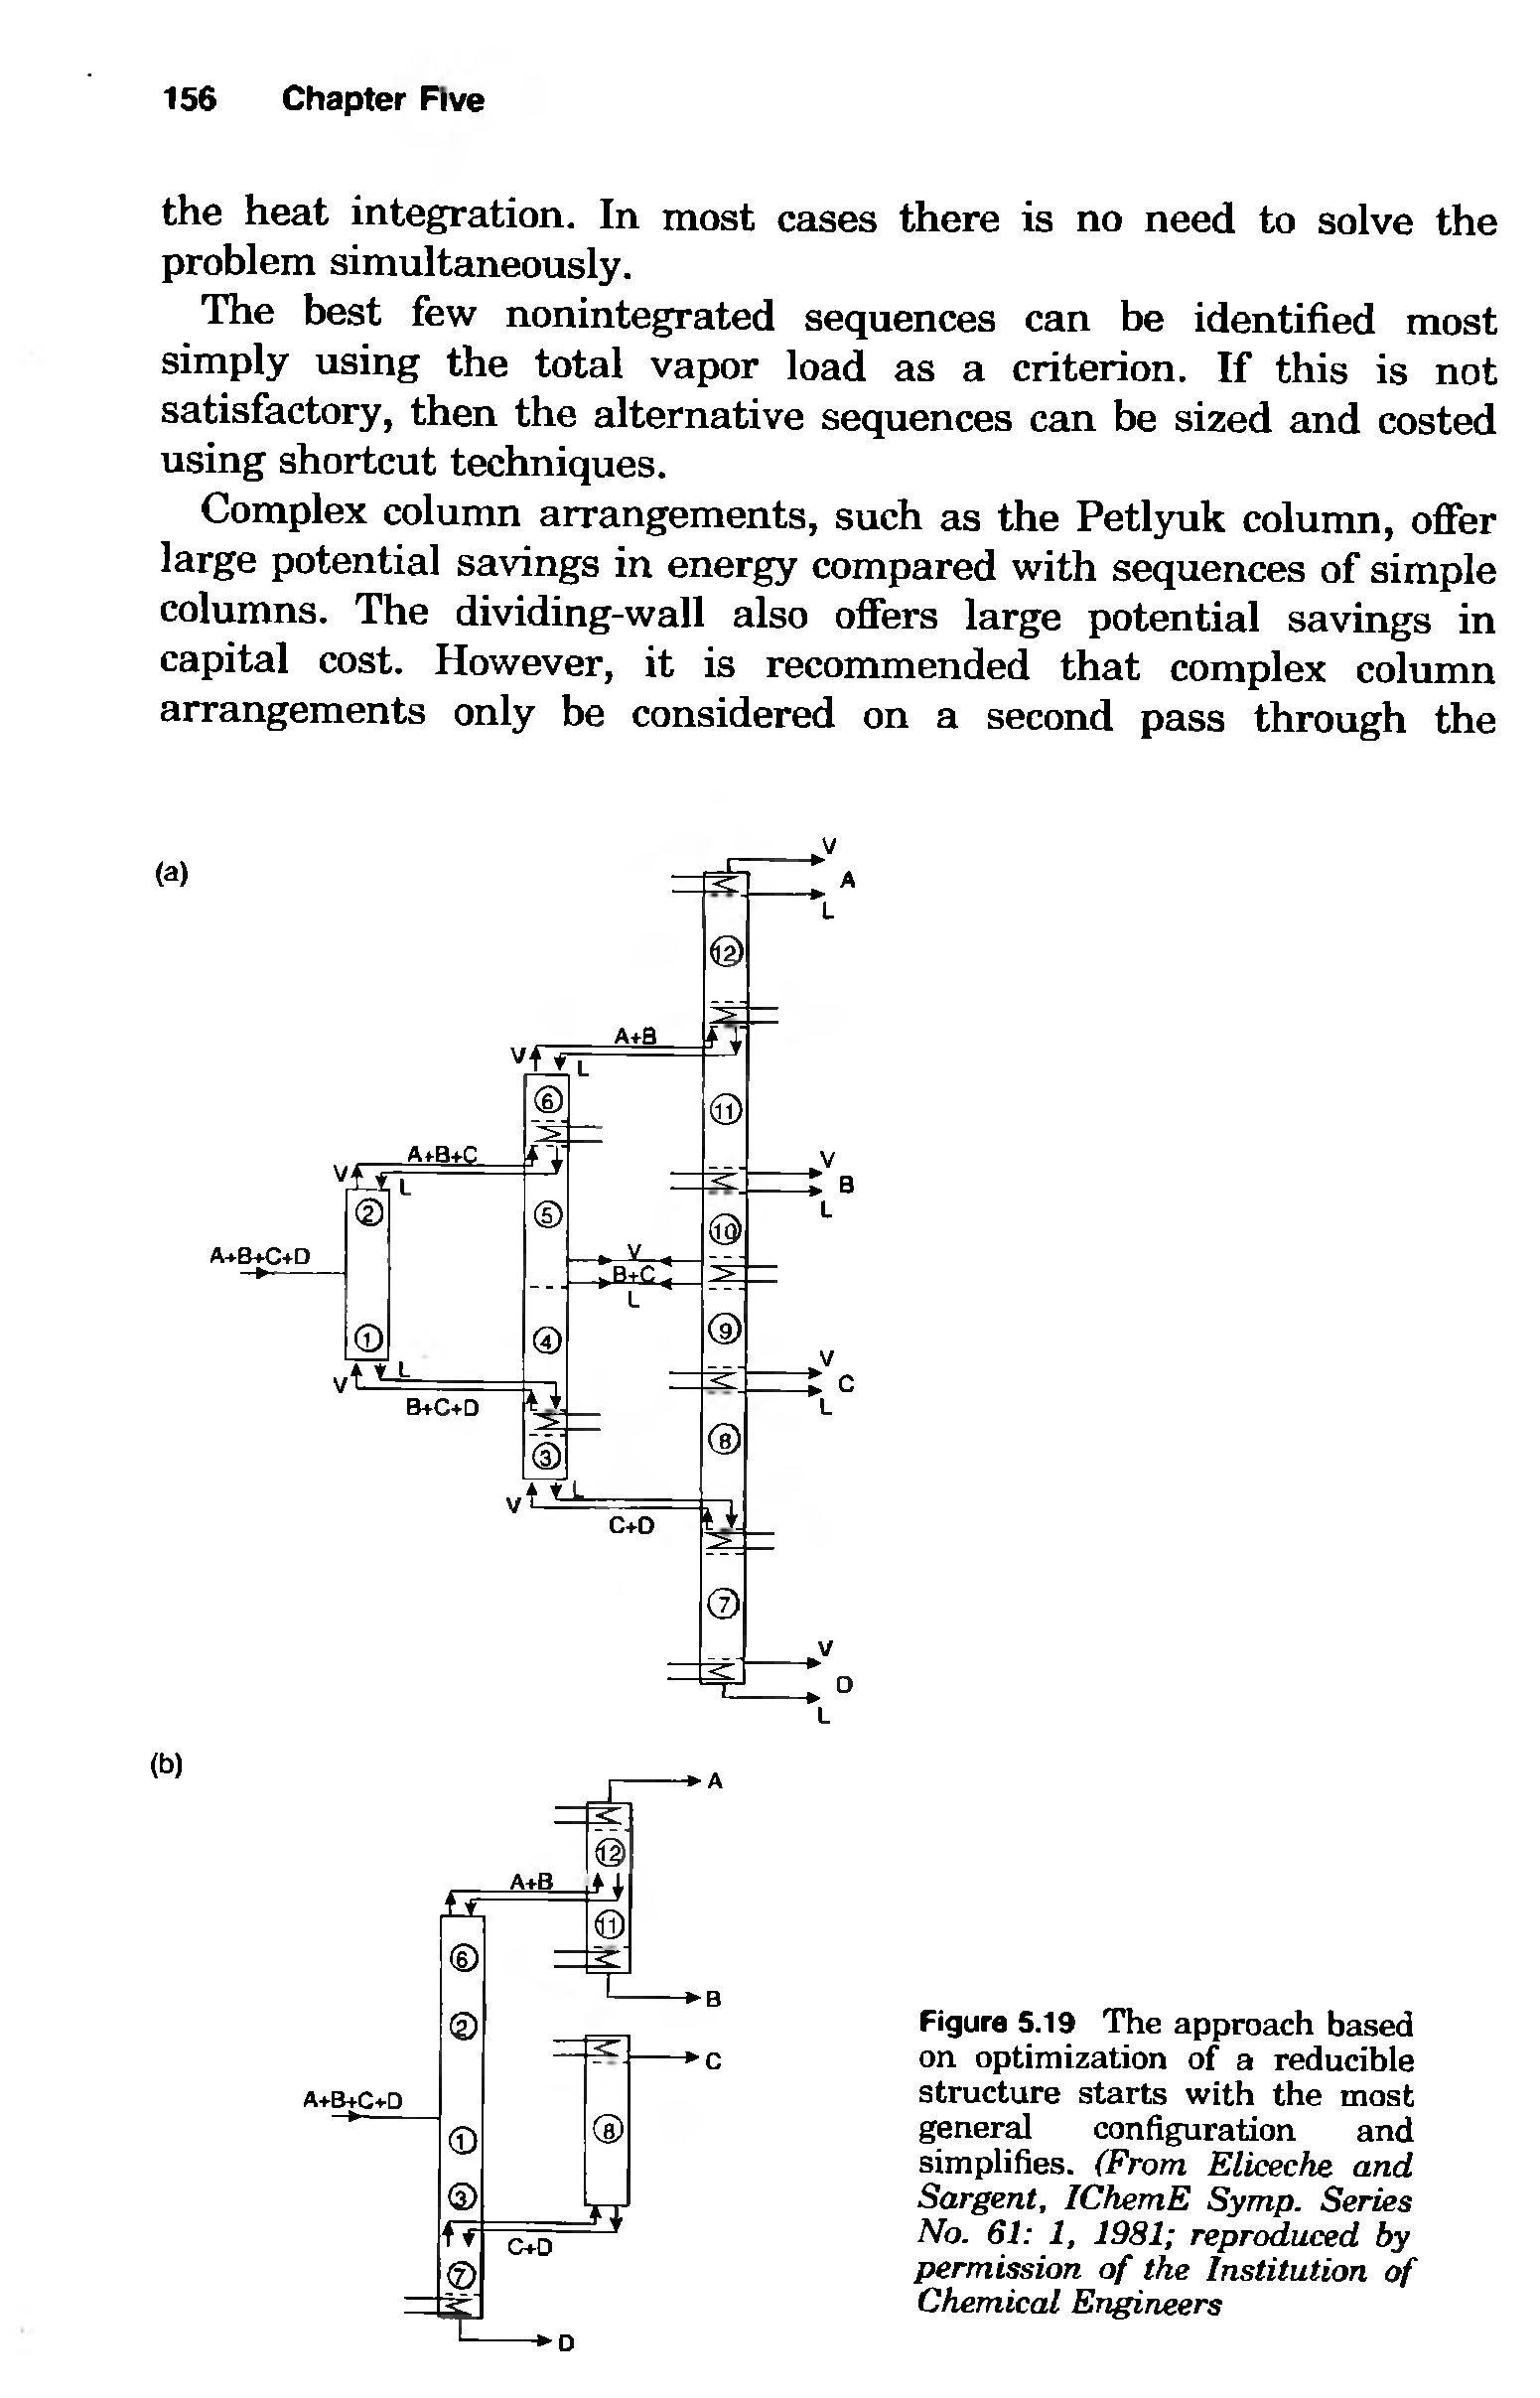 Figure S.19 The approach based on optimization of a reducible structure starts with the most general configuration and simplifies. (From Eliceche and Sargent, IChemE Symp. Series No. 61 1, 1981 reproduced by permission of the Institution of Chemical Engineers...